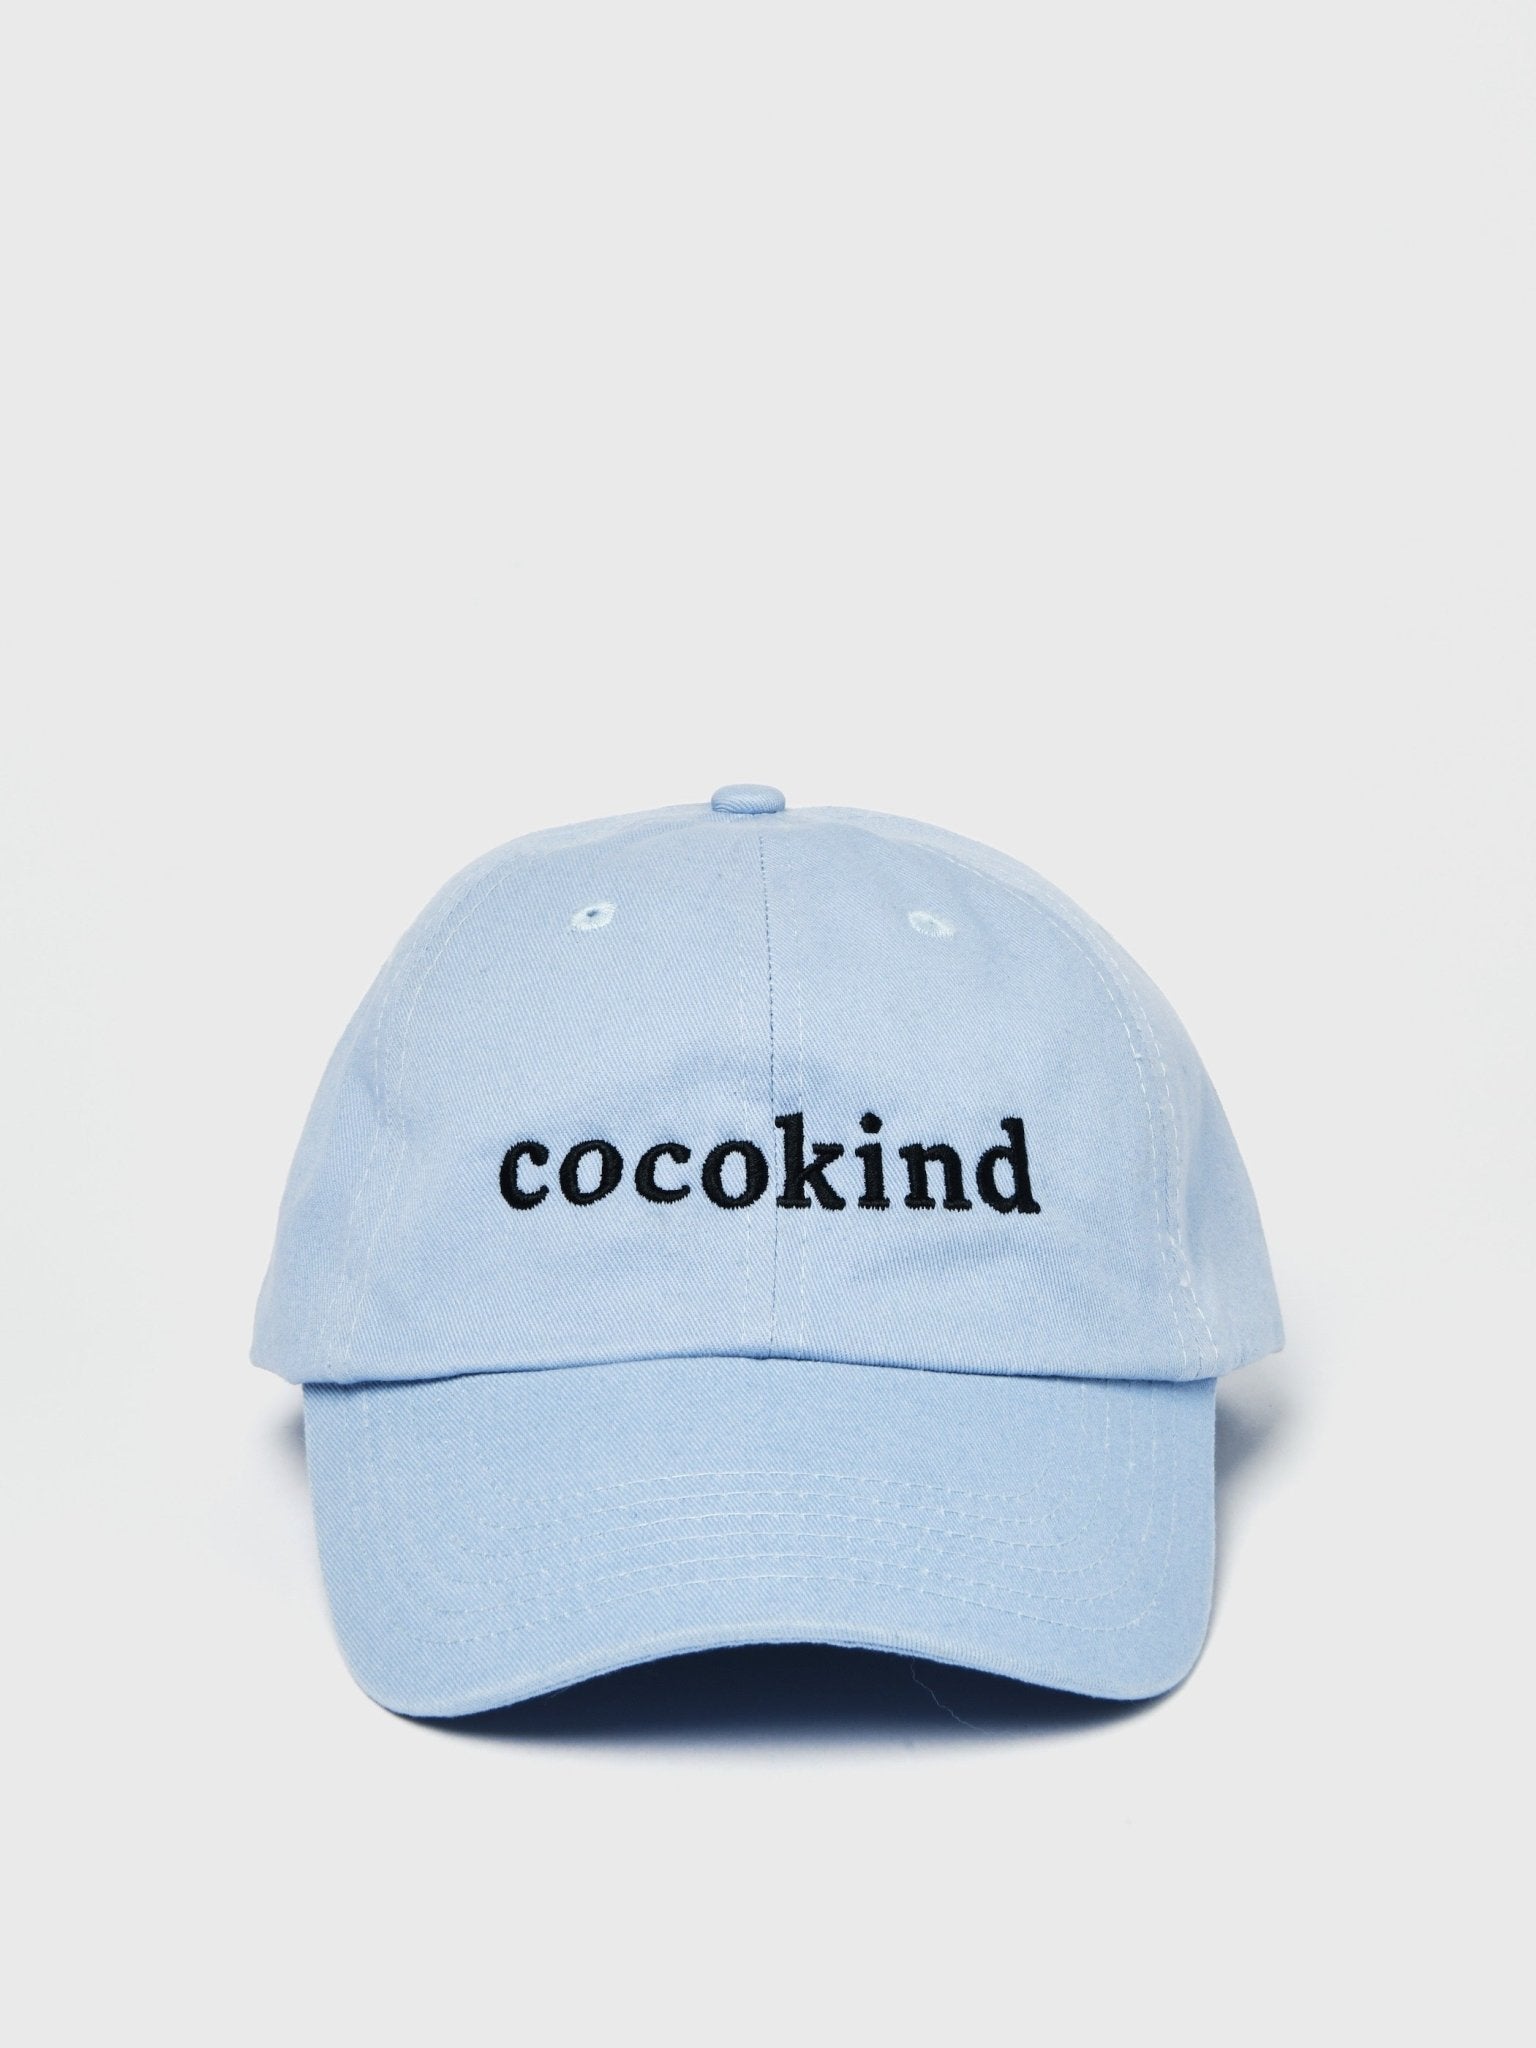 special edition hat - cocokind